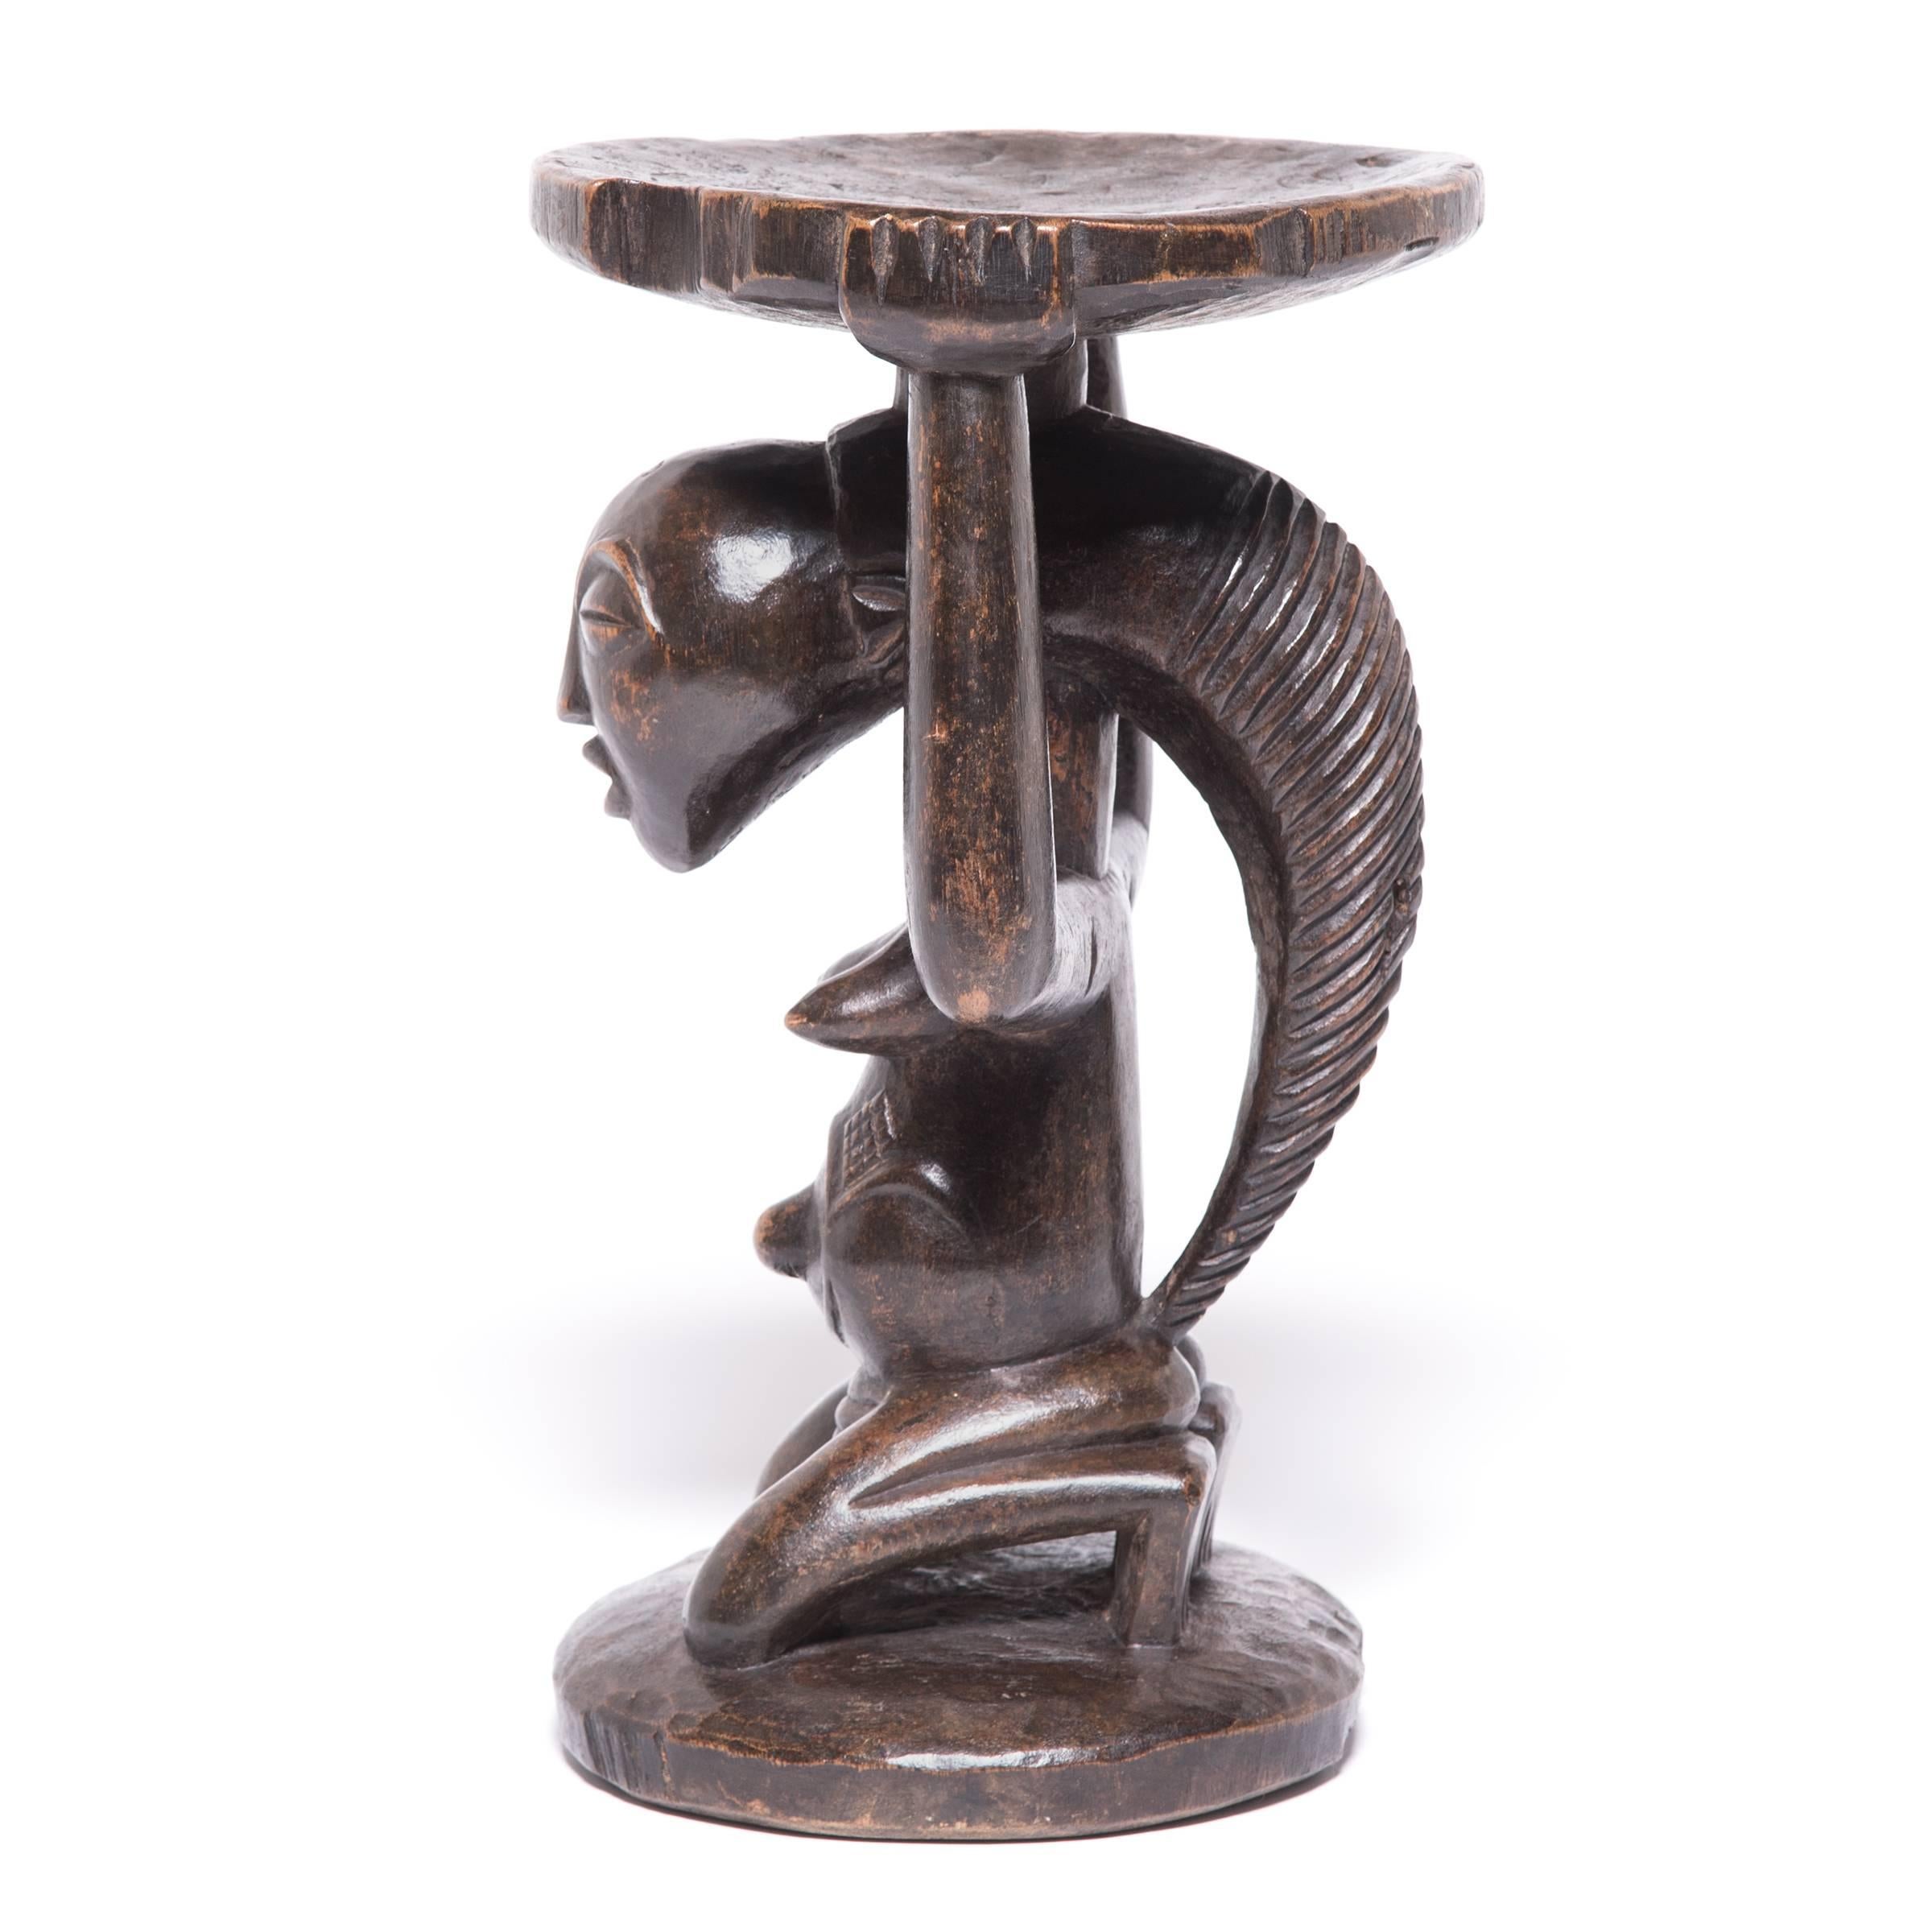 This stool by the Luba people of Zaire beautifully illustrates their storied craft. A single tree trunk was carved down to a column, then carefully taken in further until the form of a kneeling woman with intricately braided hair appeared. She